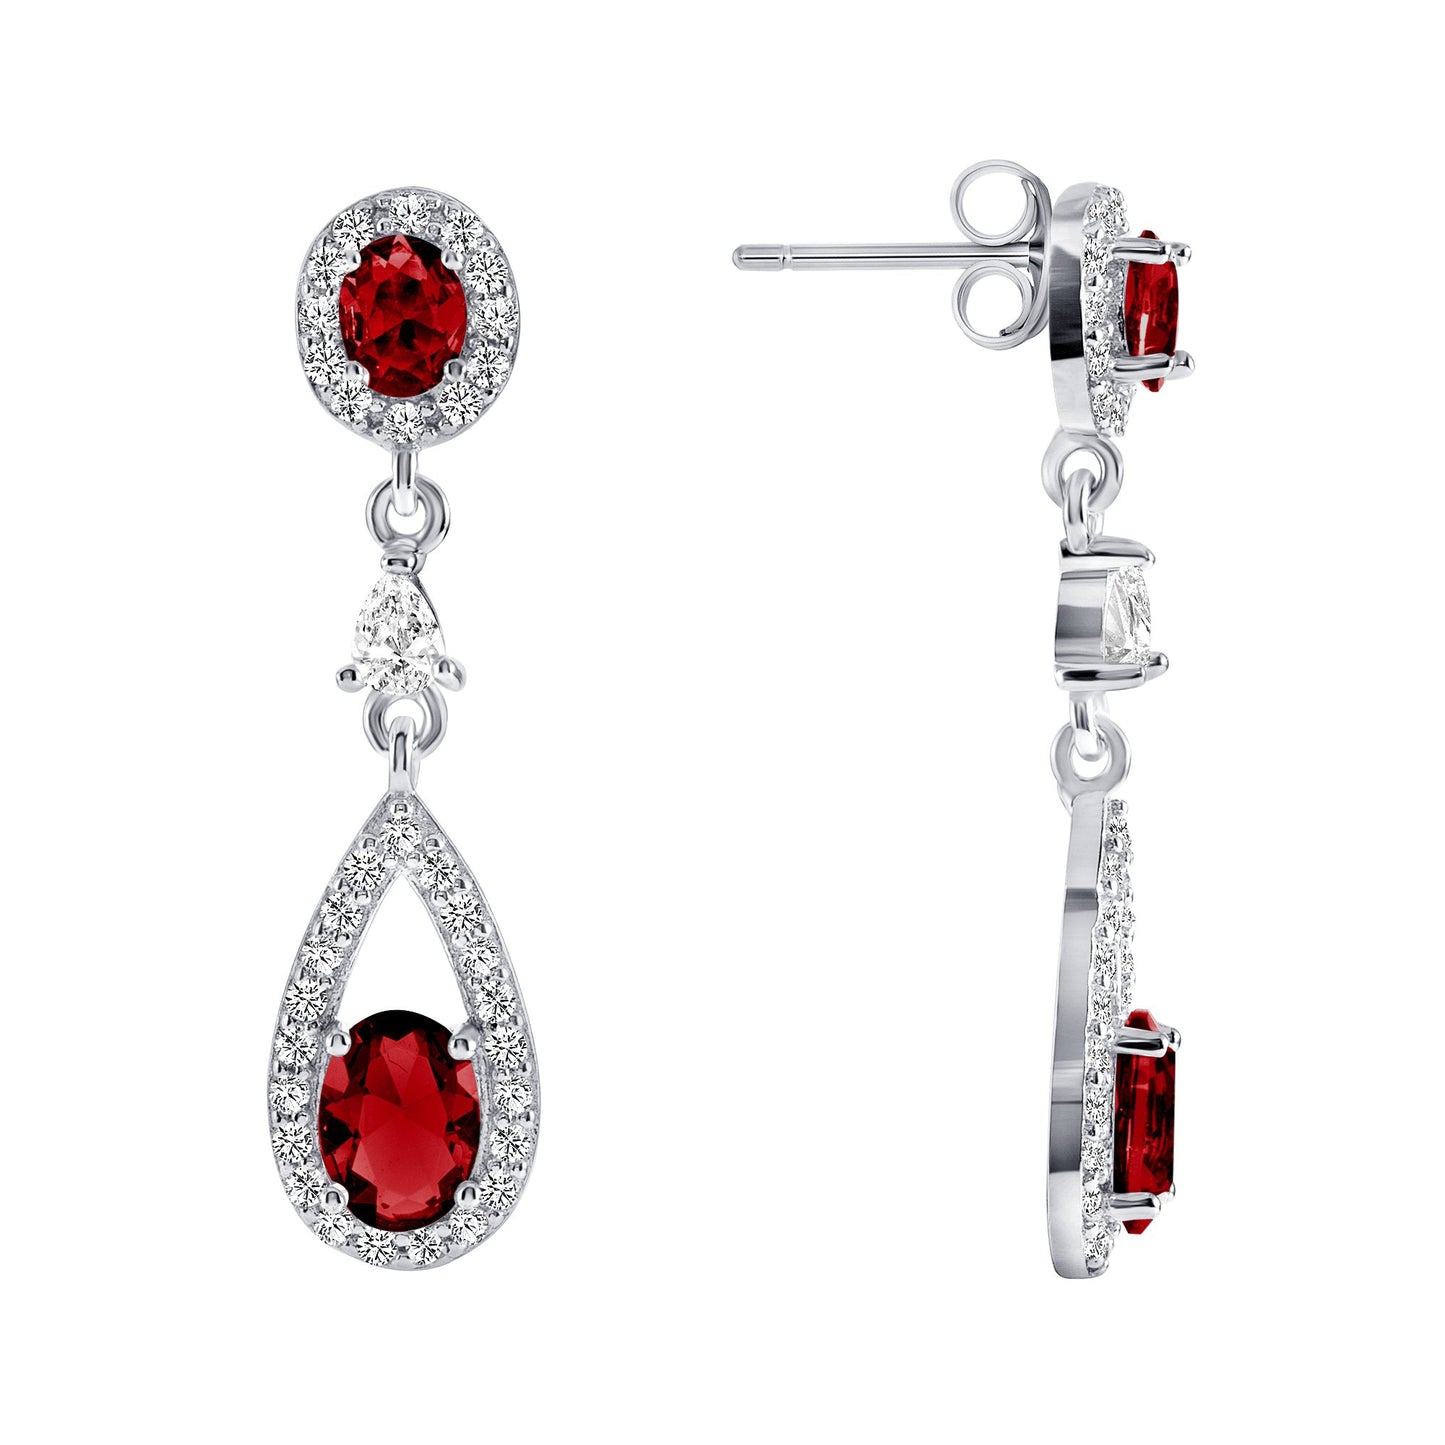 Silver 925 Rhodium Plated Dangling Red Cubic Zirconia Earrings. DGE1008RED